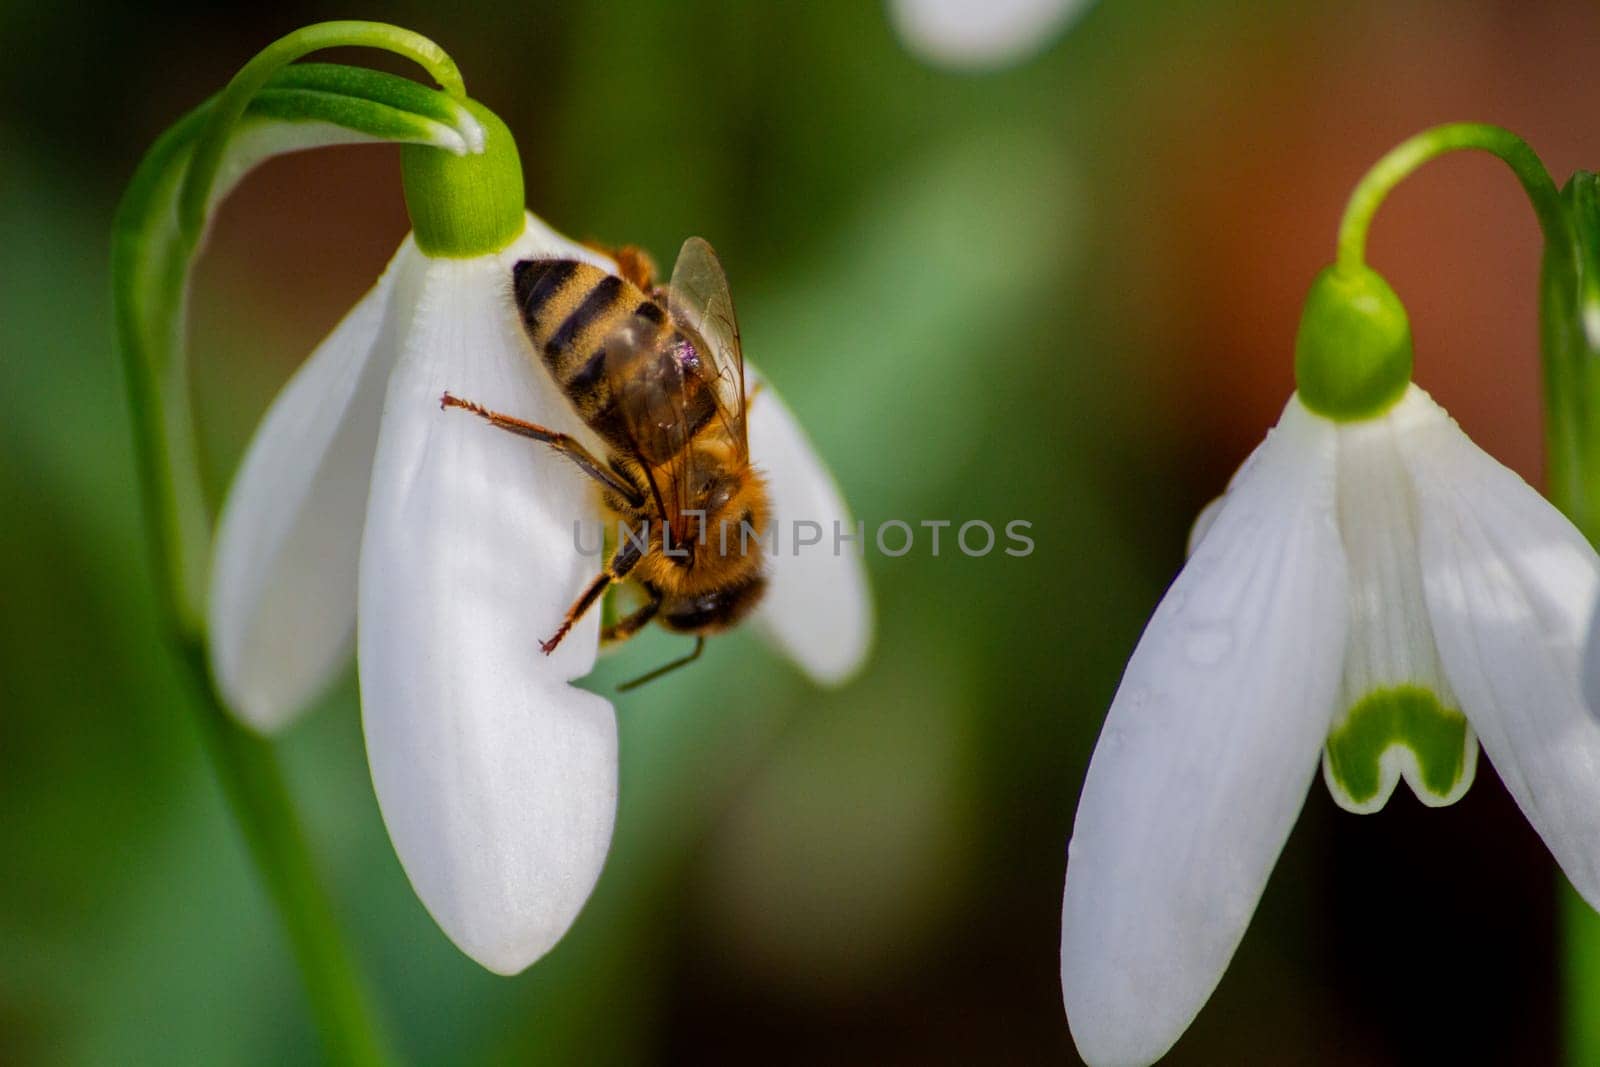 A bee resting on a white flower